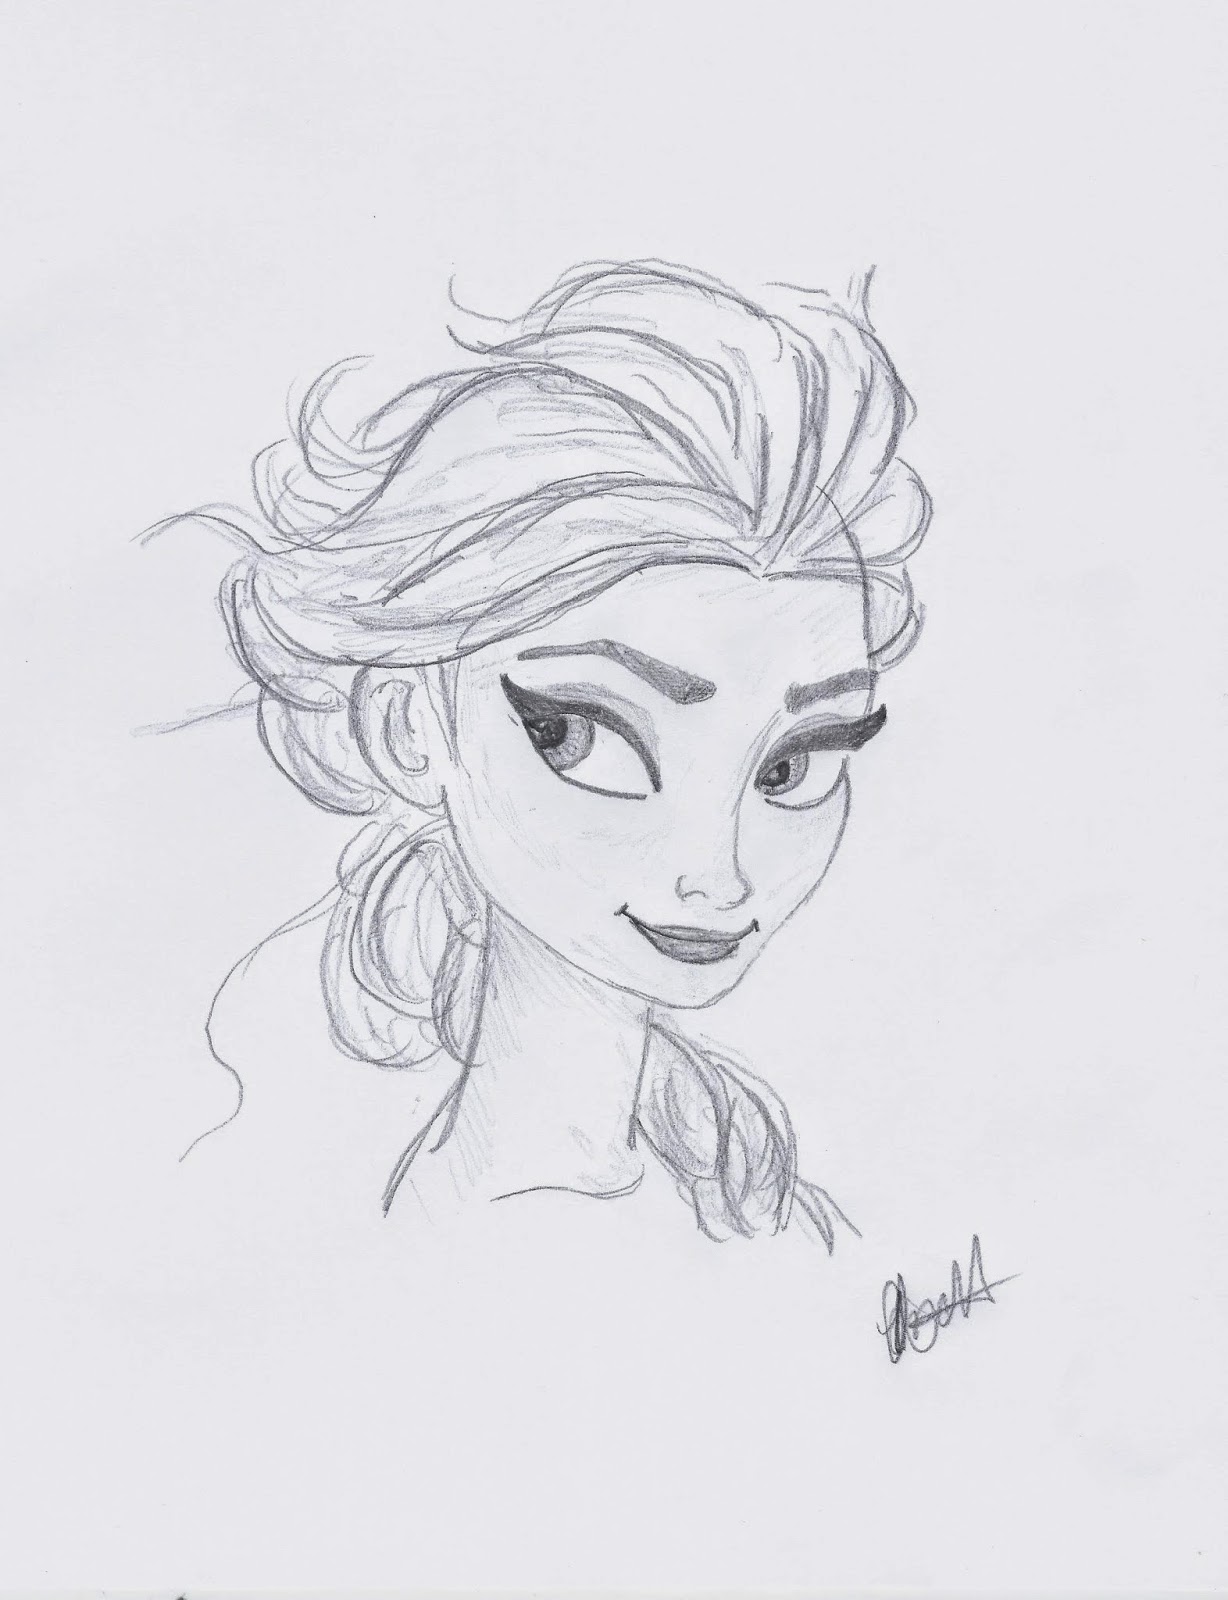 Elsa from Frozen illustrated by Jo Linsdell